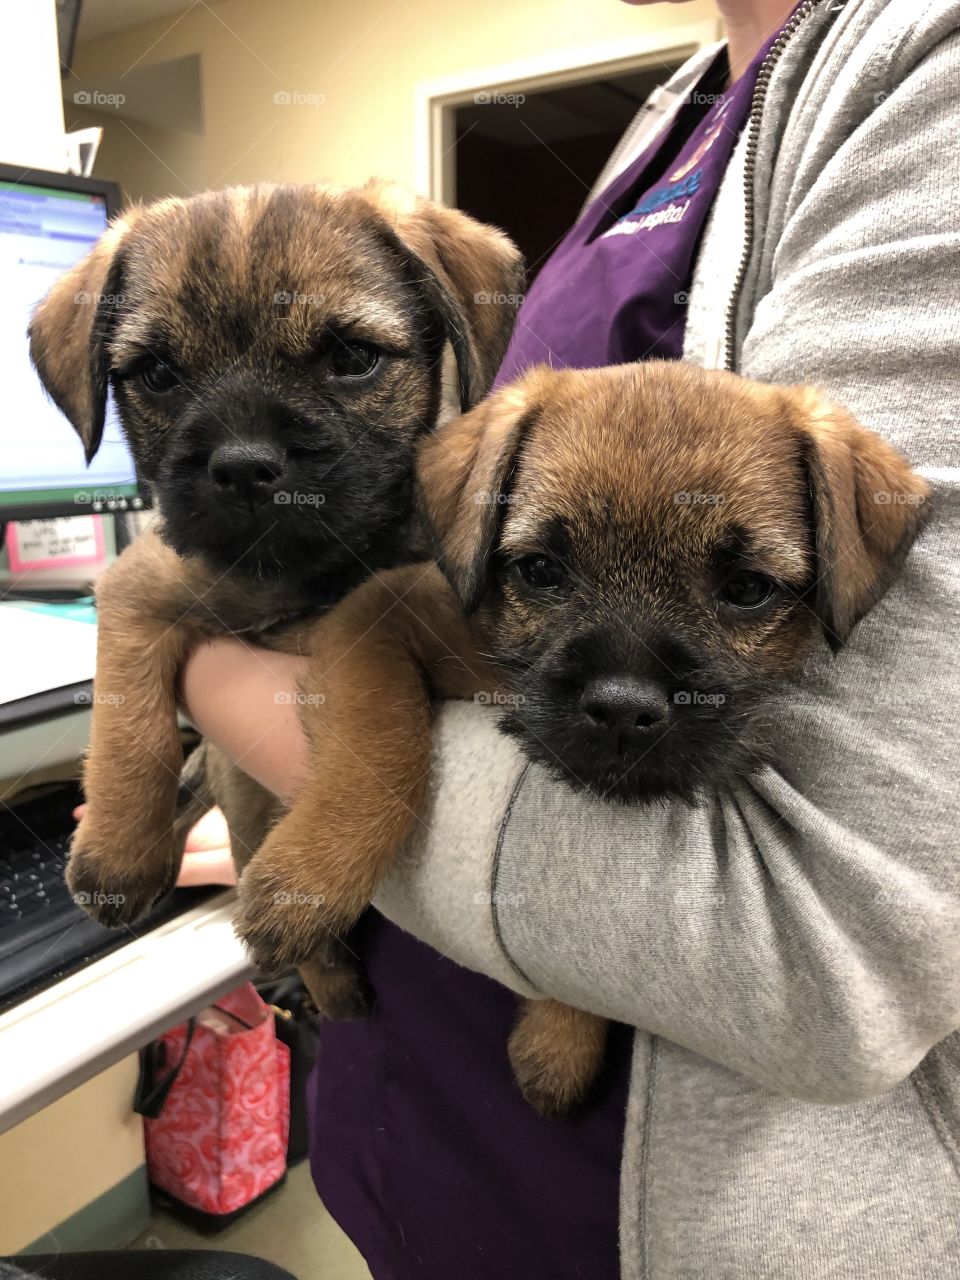 So in love with those border terrier puppy faces!